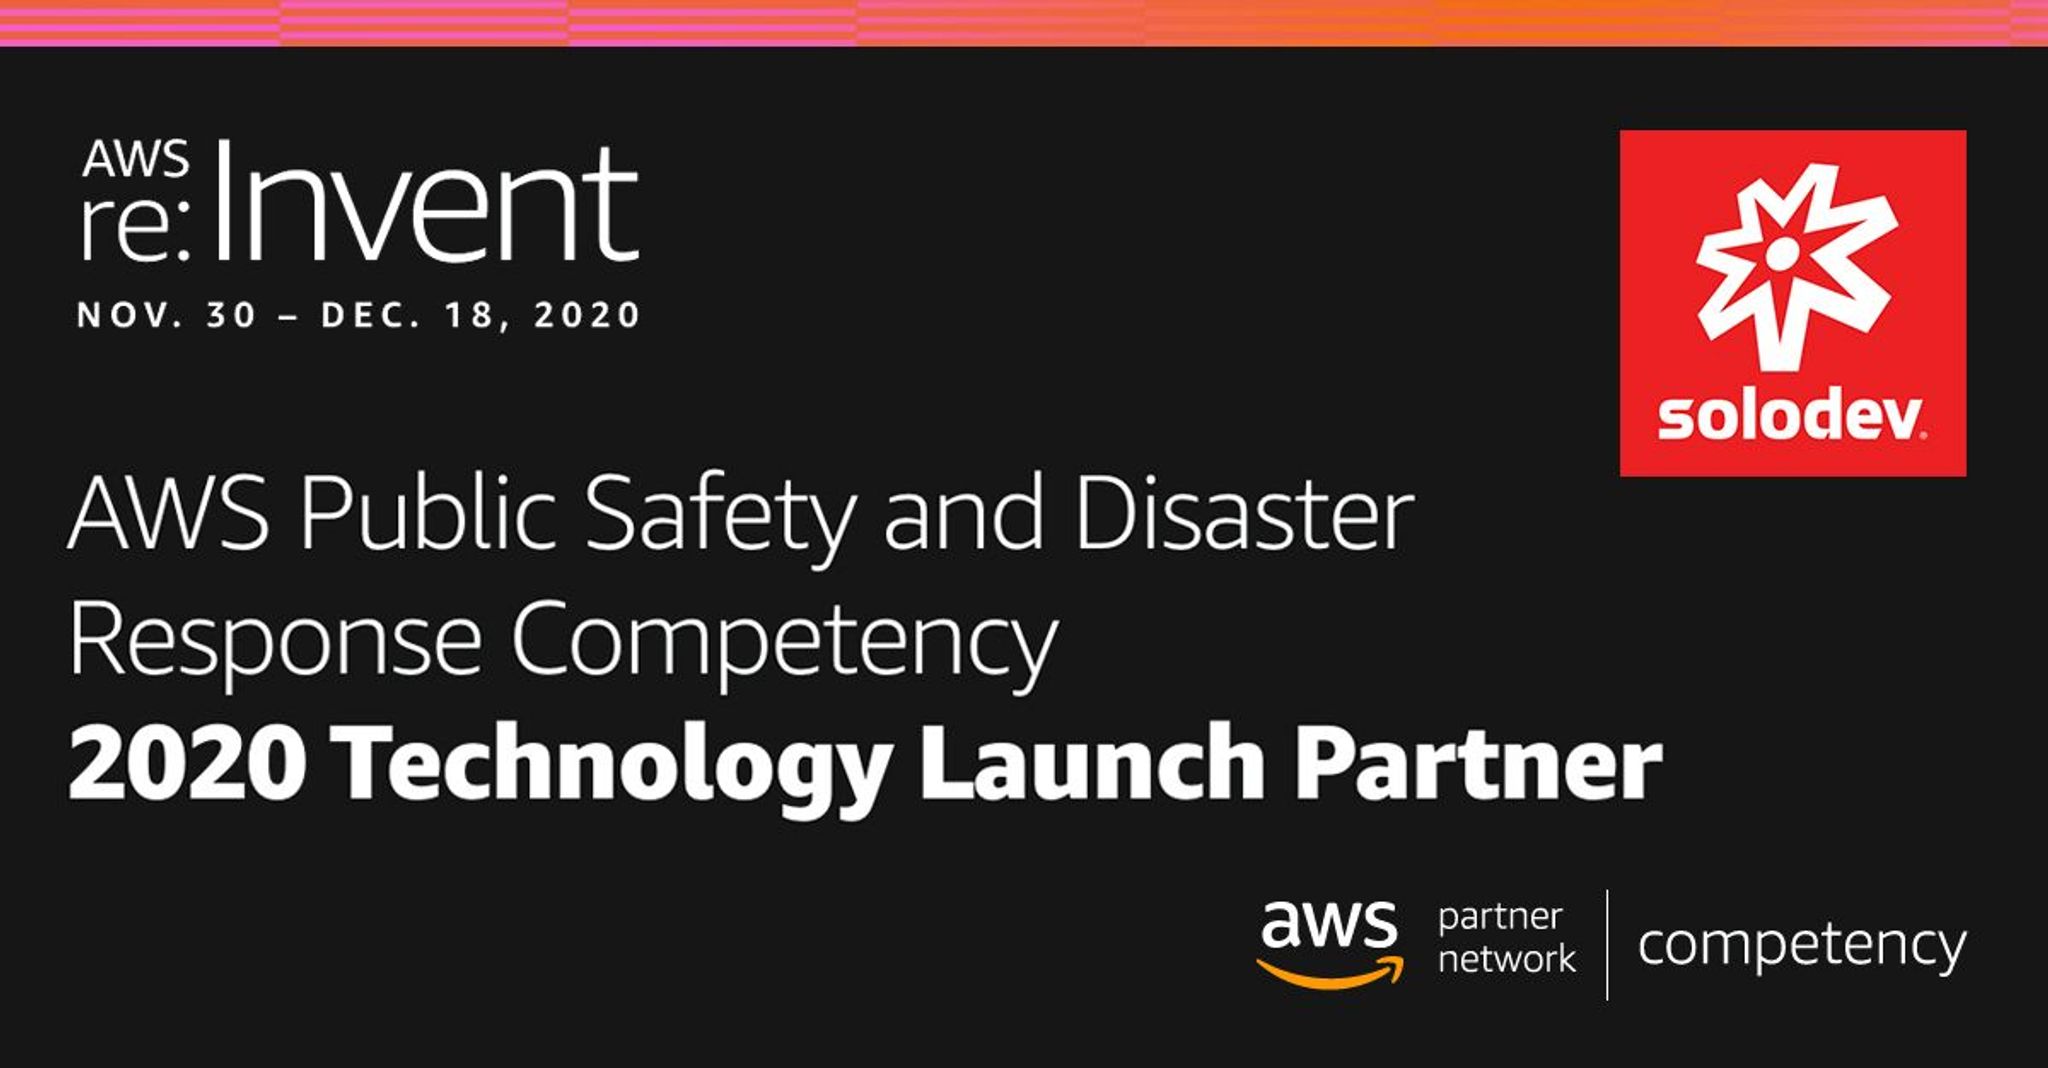 Solodev AWS Public Safety and Disaster Response Competency Banner